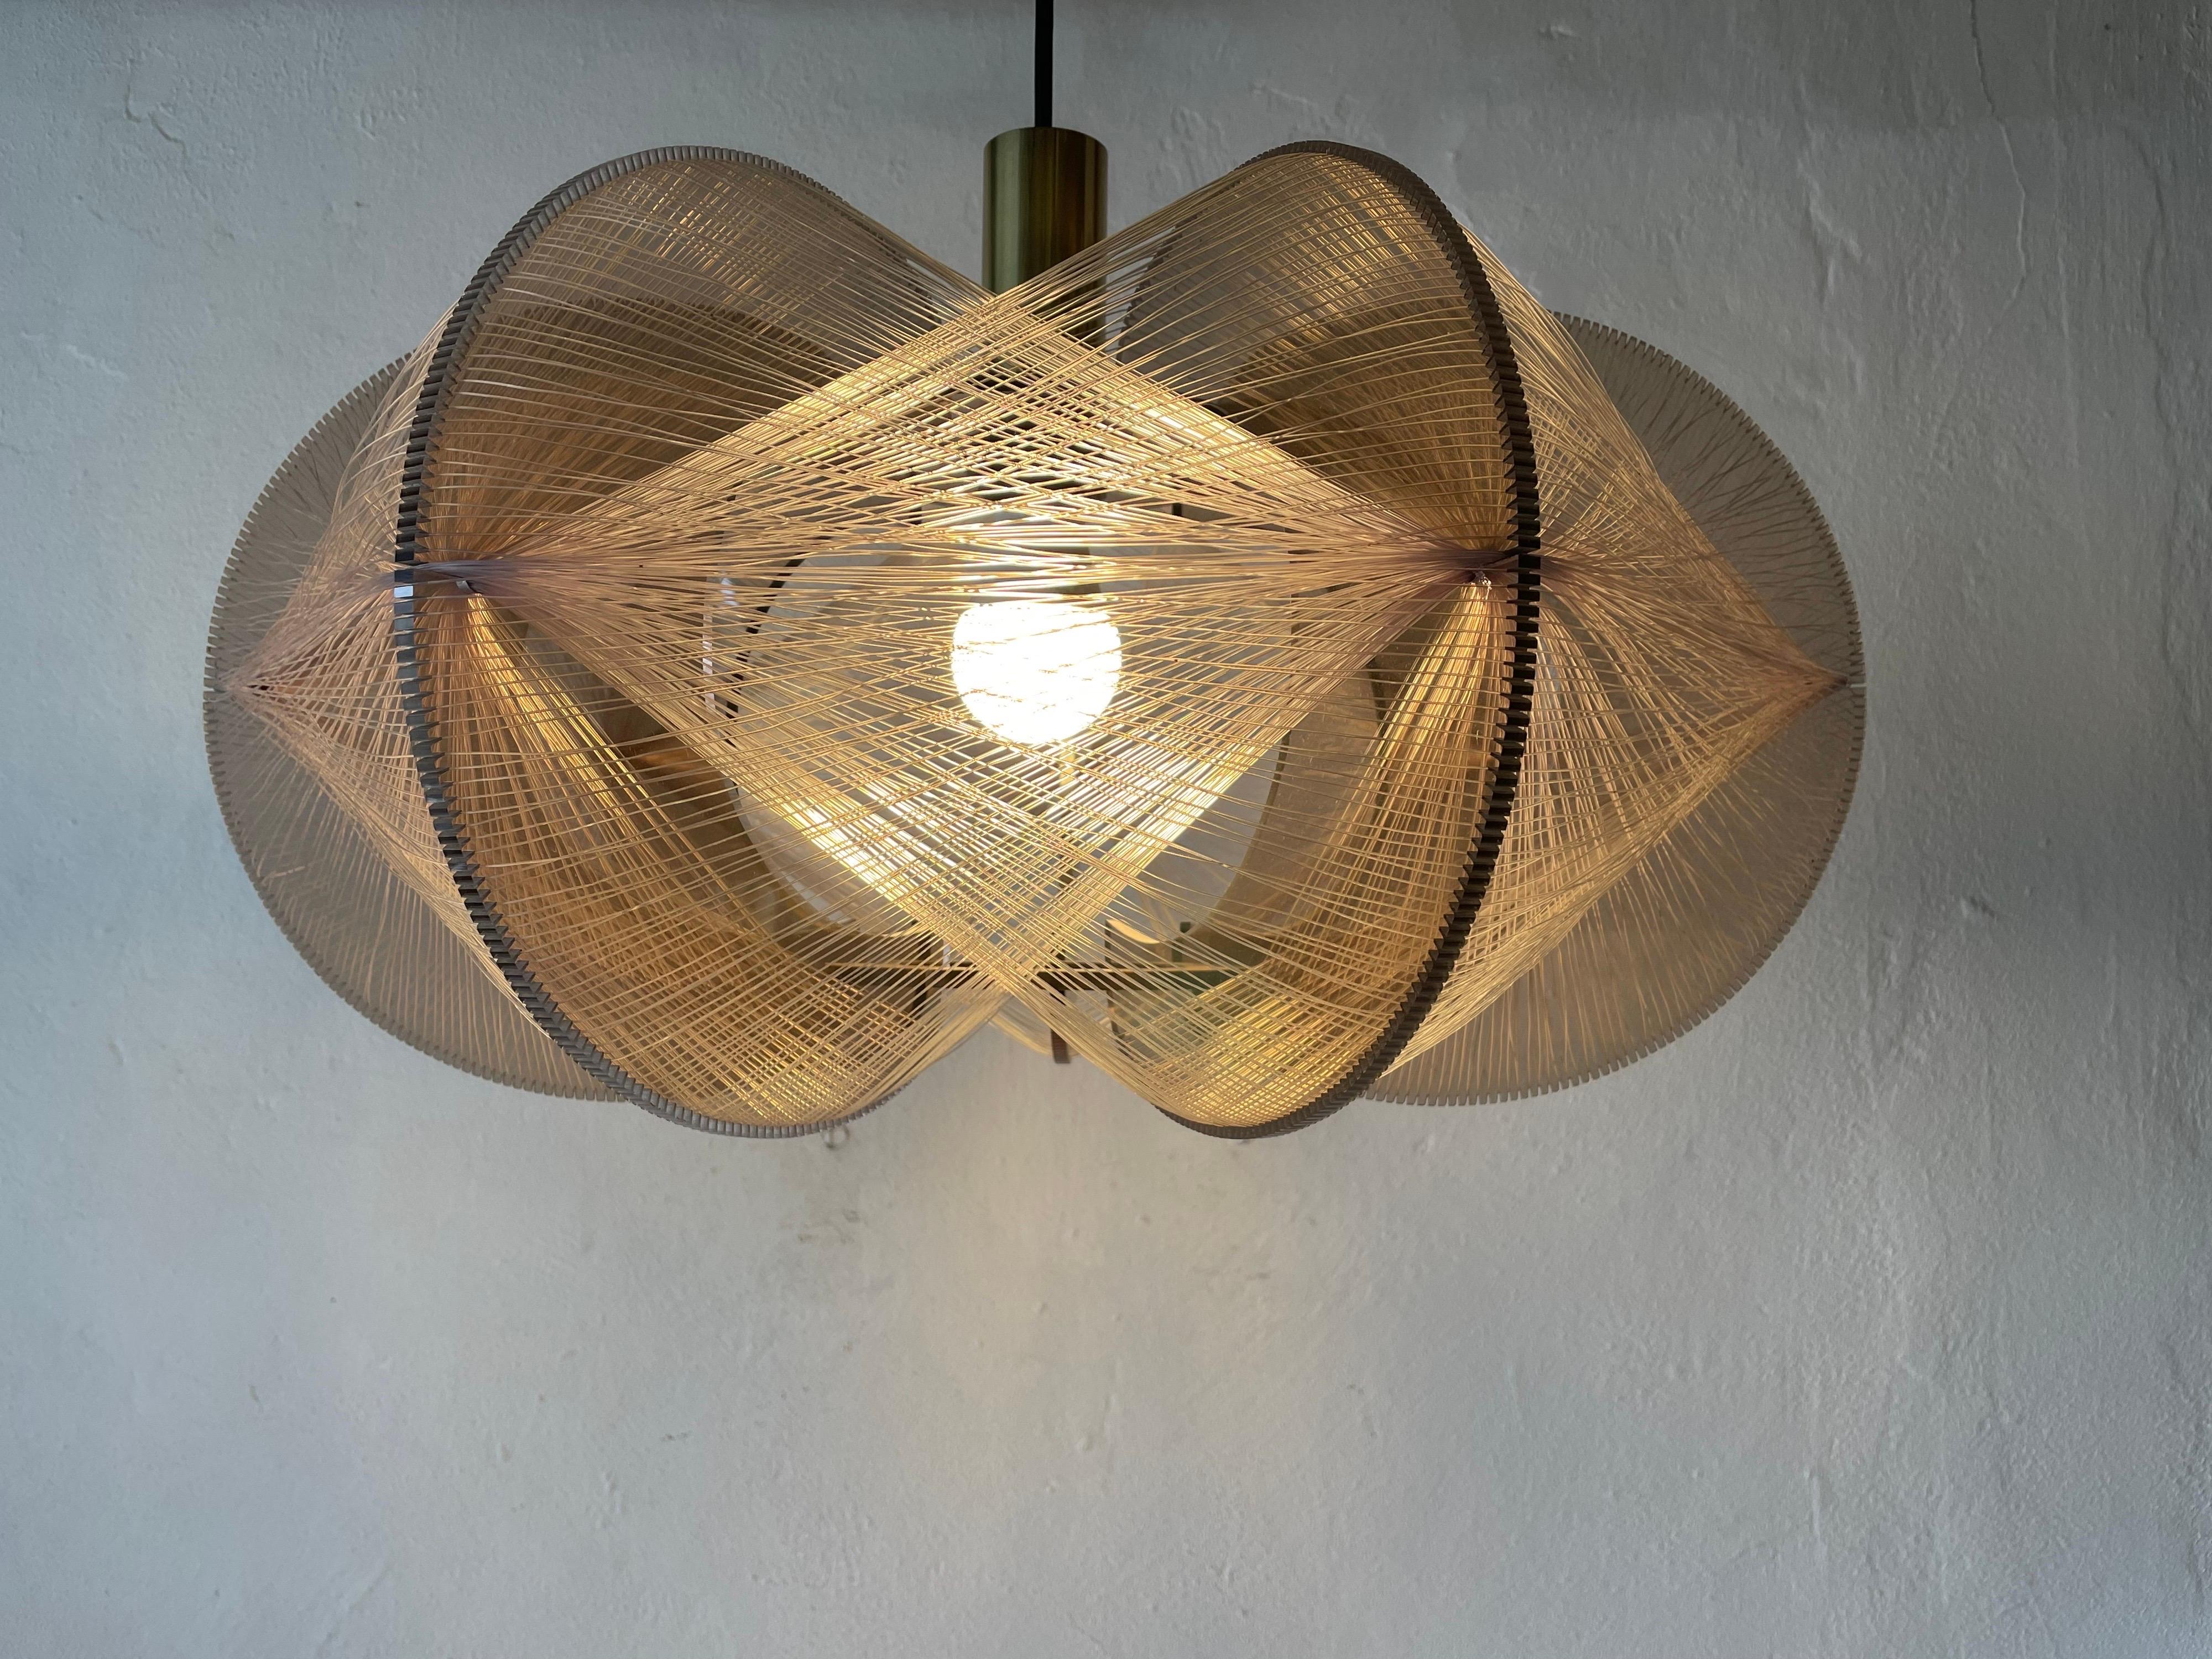 Plexiglass & Wired Pendant Lamp by Paul Secon for Sompex, 1970s, Germany 3